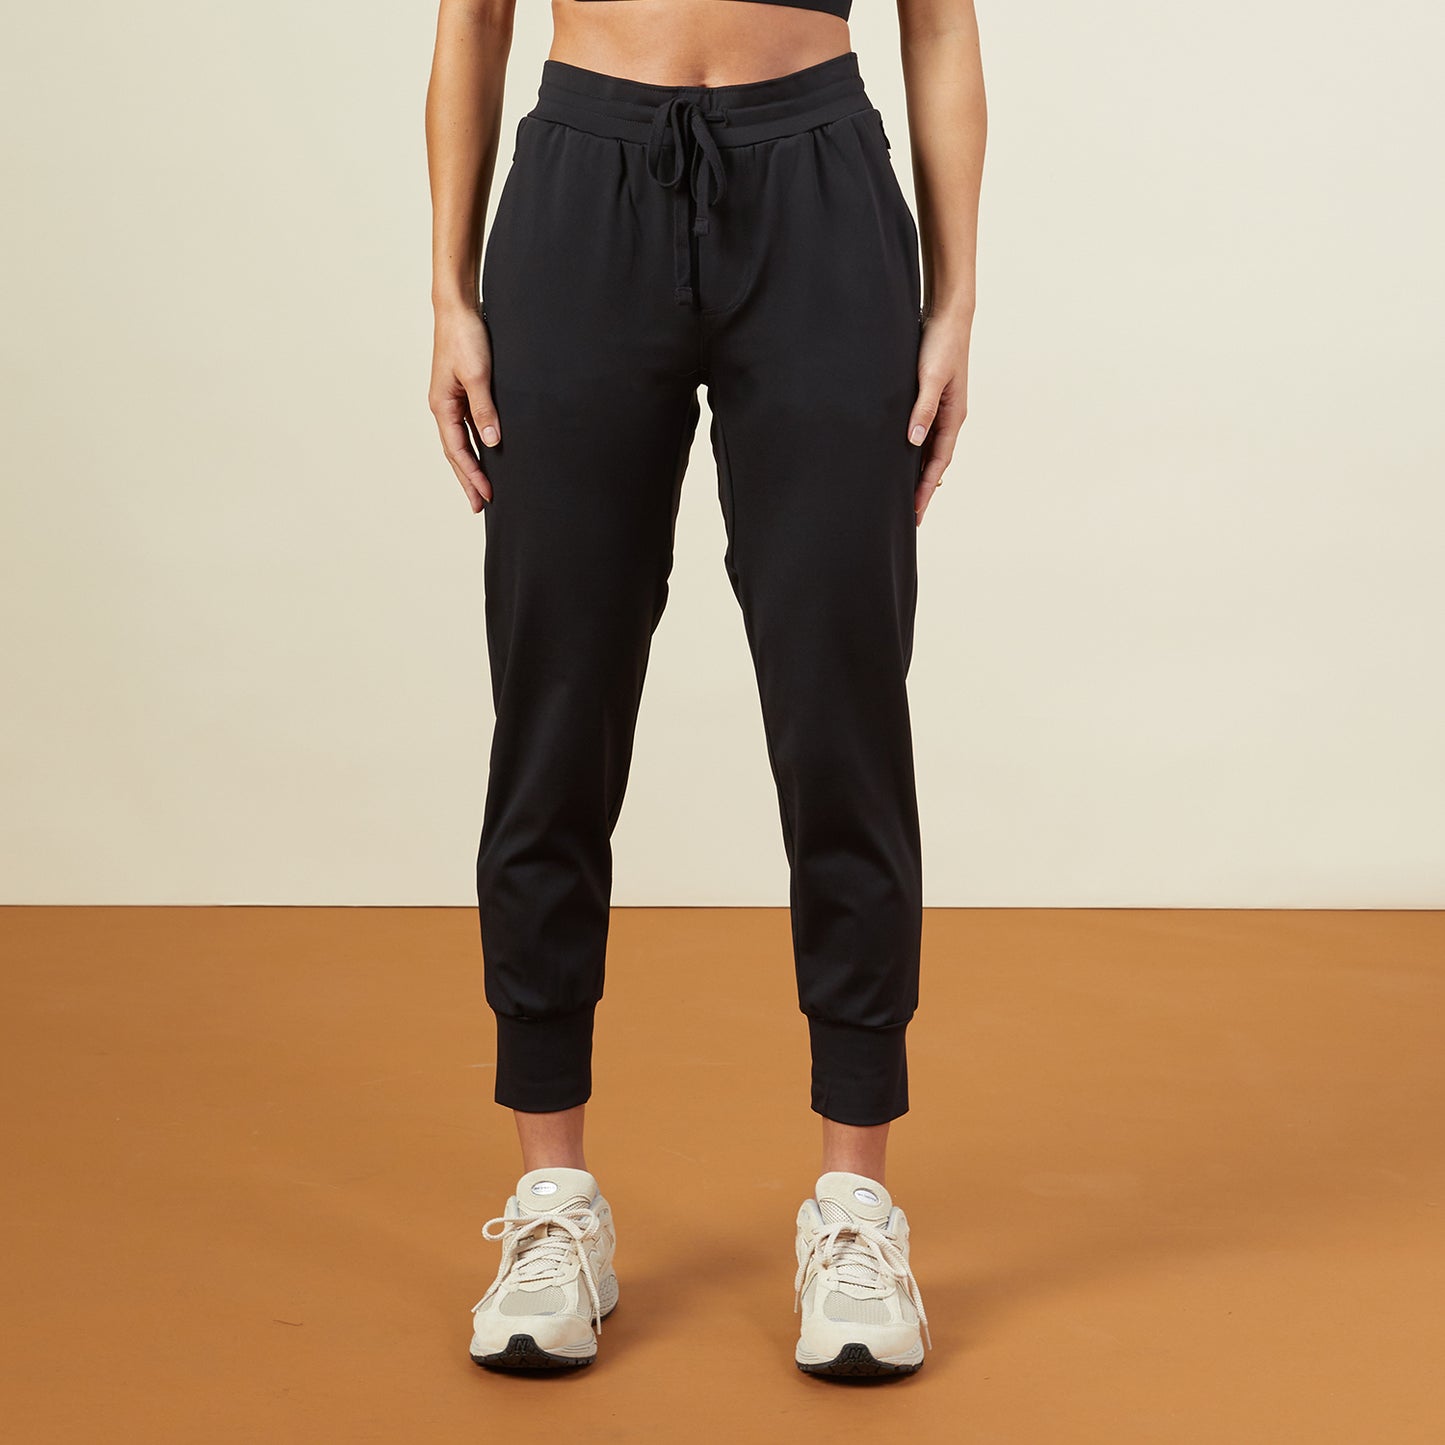 Front view of model wearing the movement joggers in black